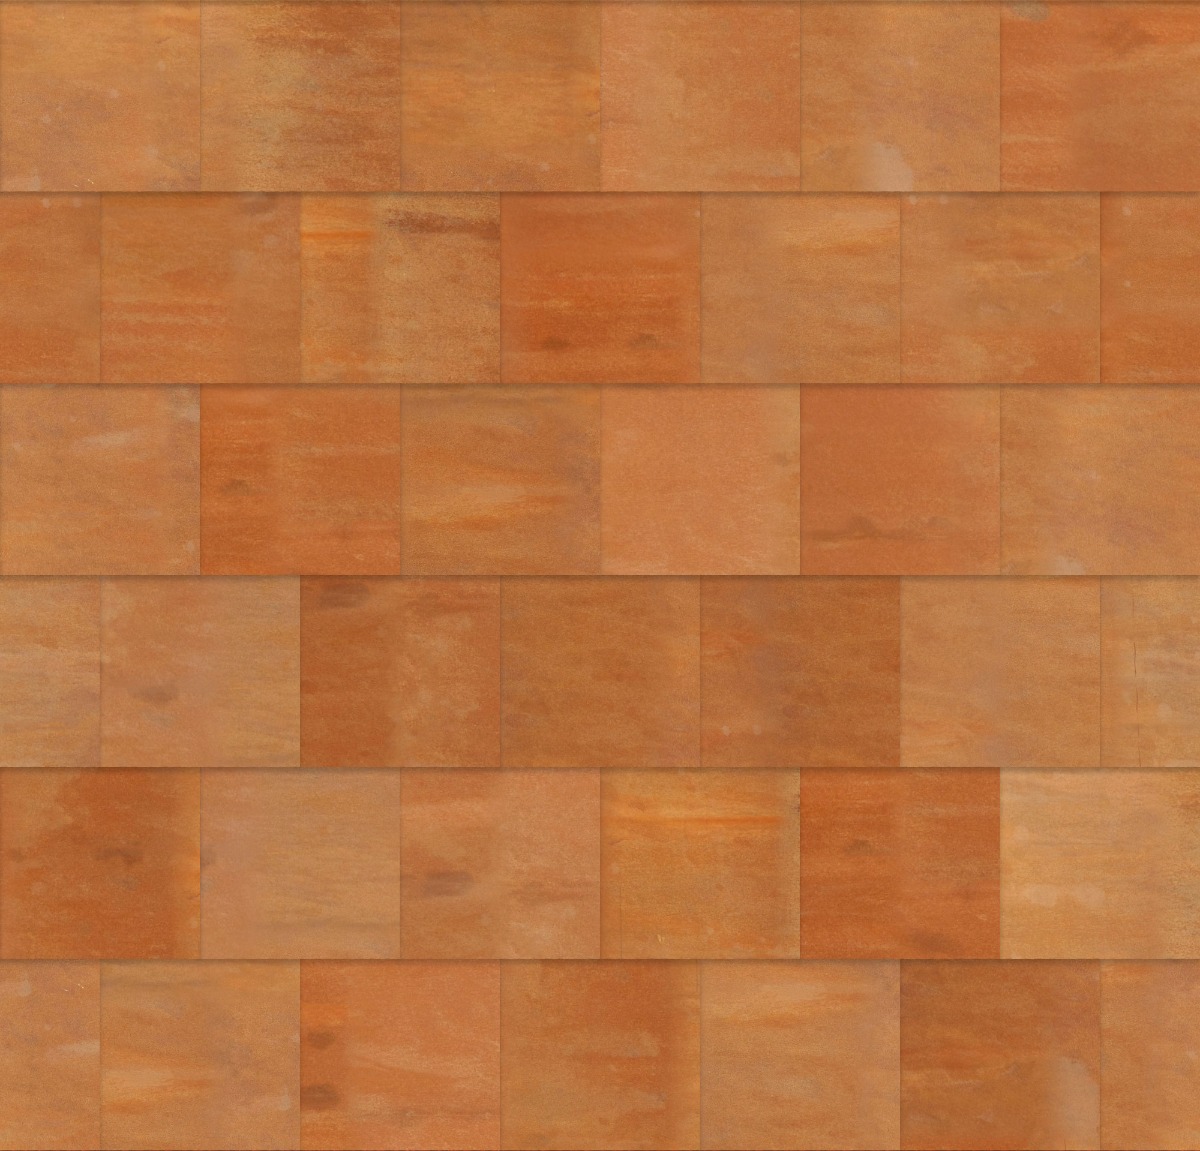 A seamless metal texture with corten steel a sheets arranged in a Stretcher pattern